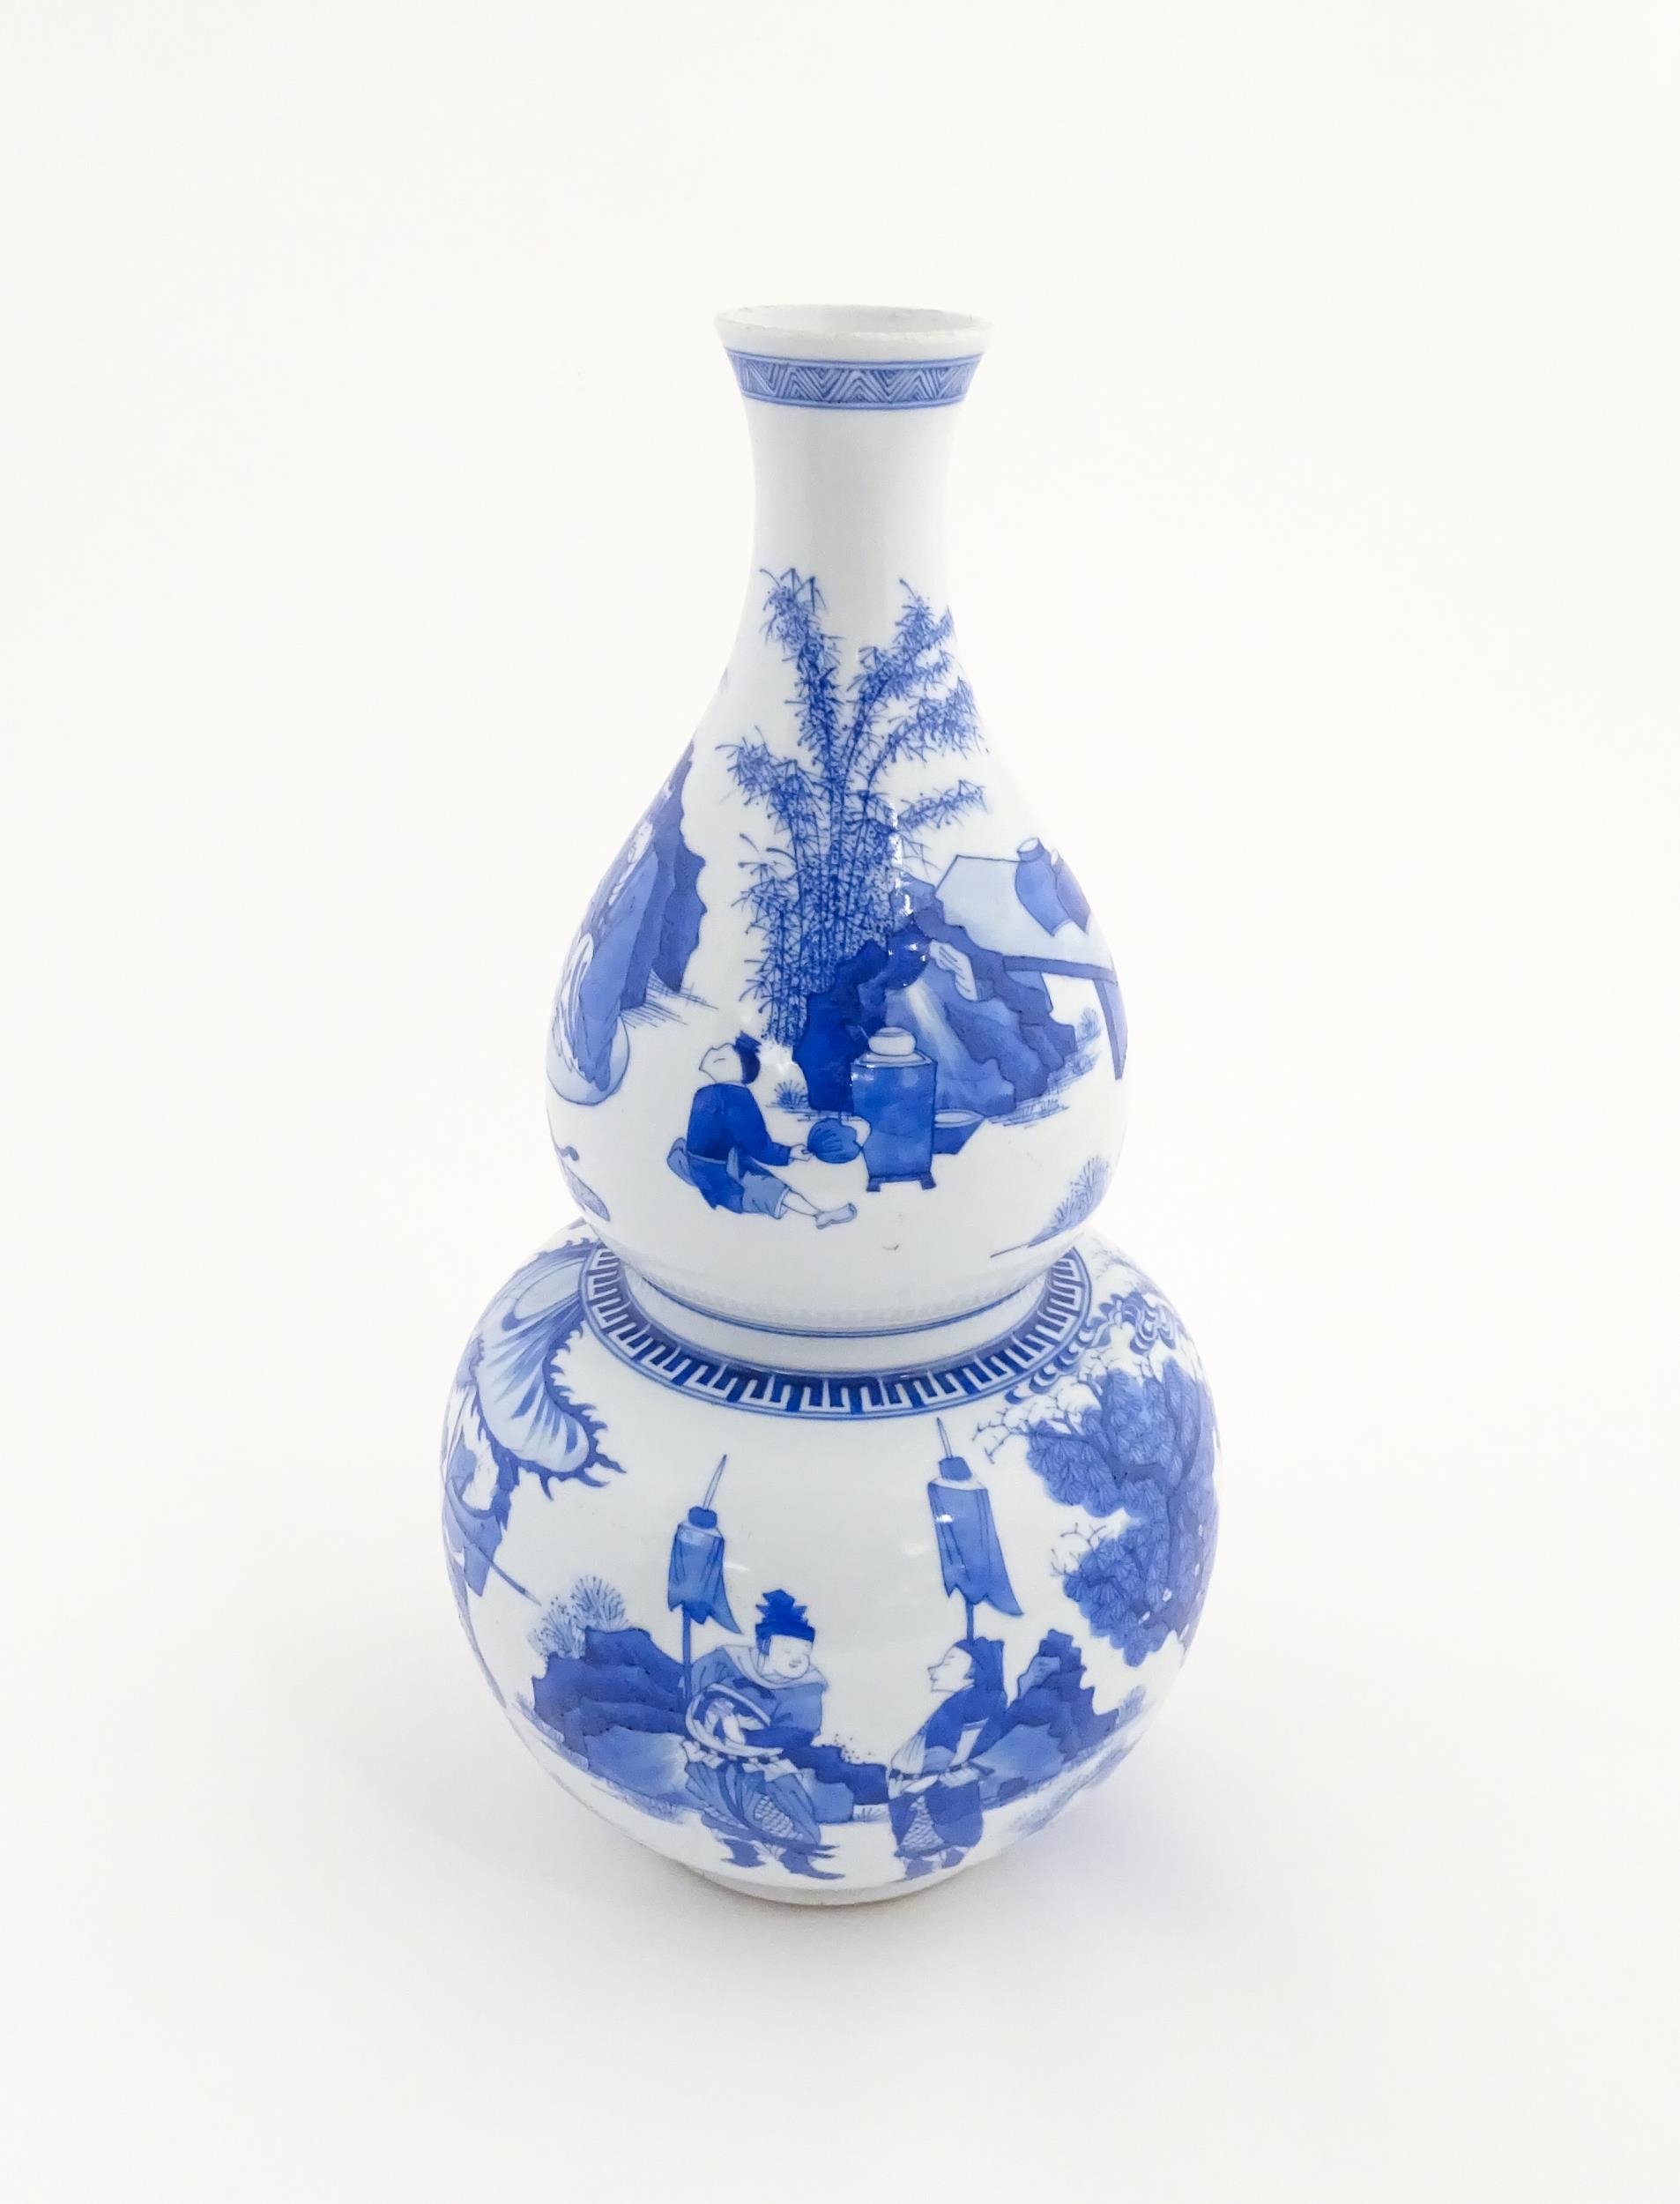 A Chinese blue and white double gourd vase decorated with figures in a landscape. Approx. 16 1/4"